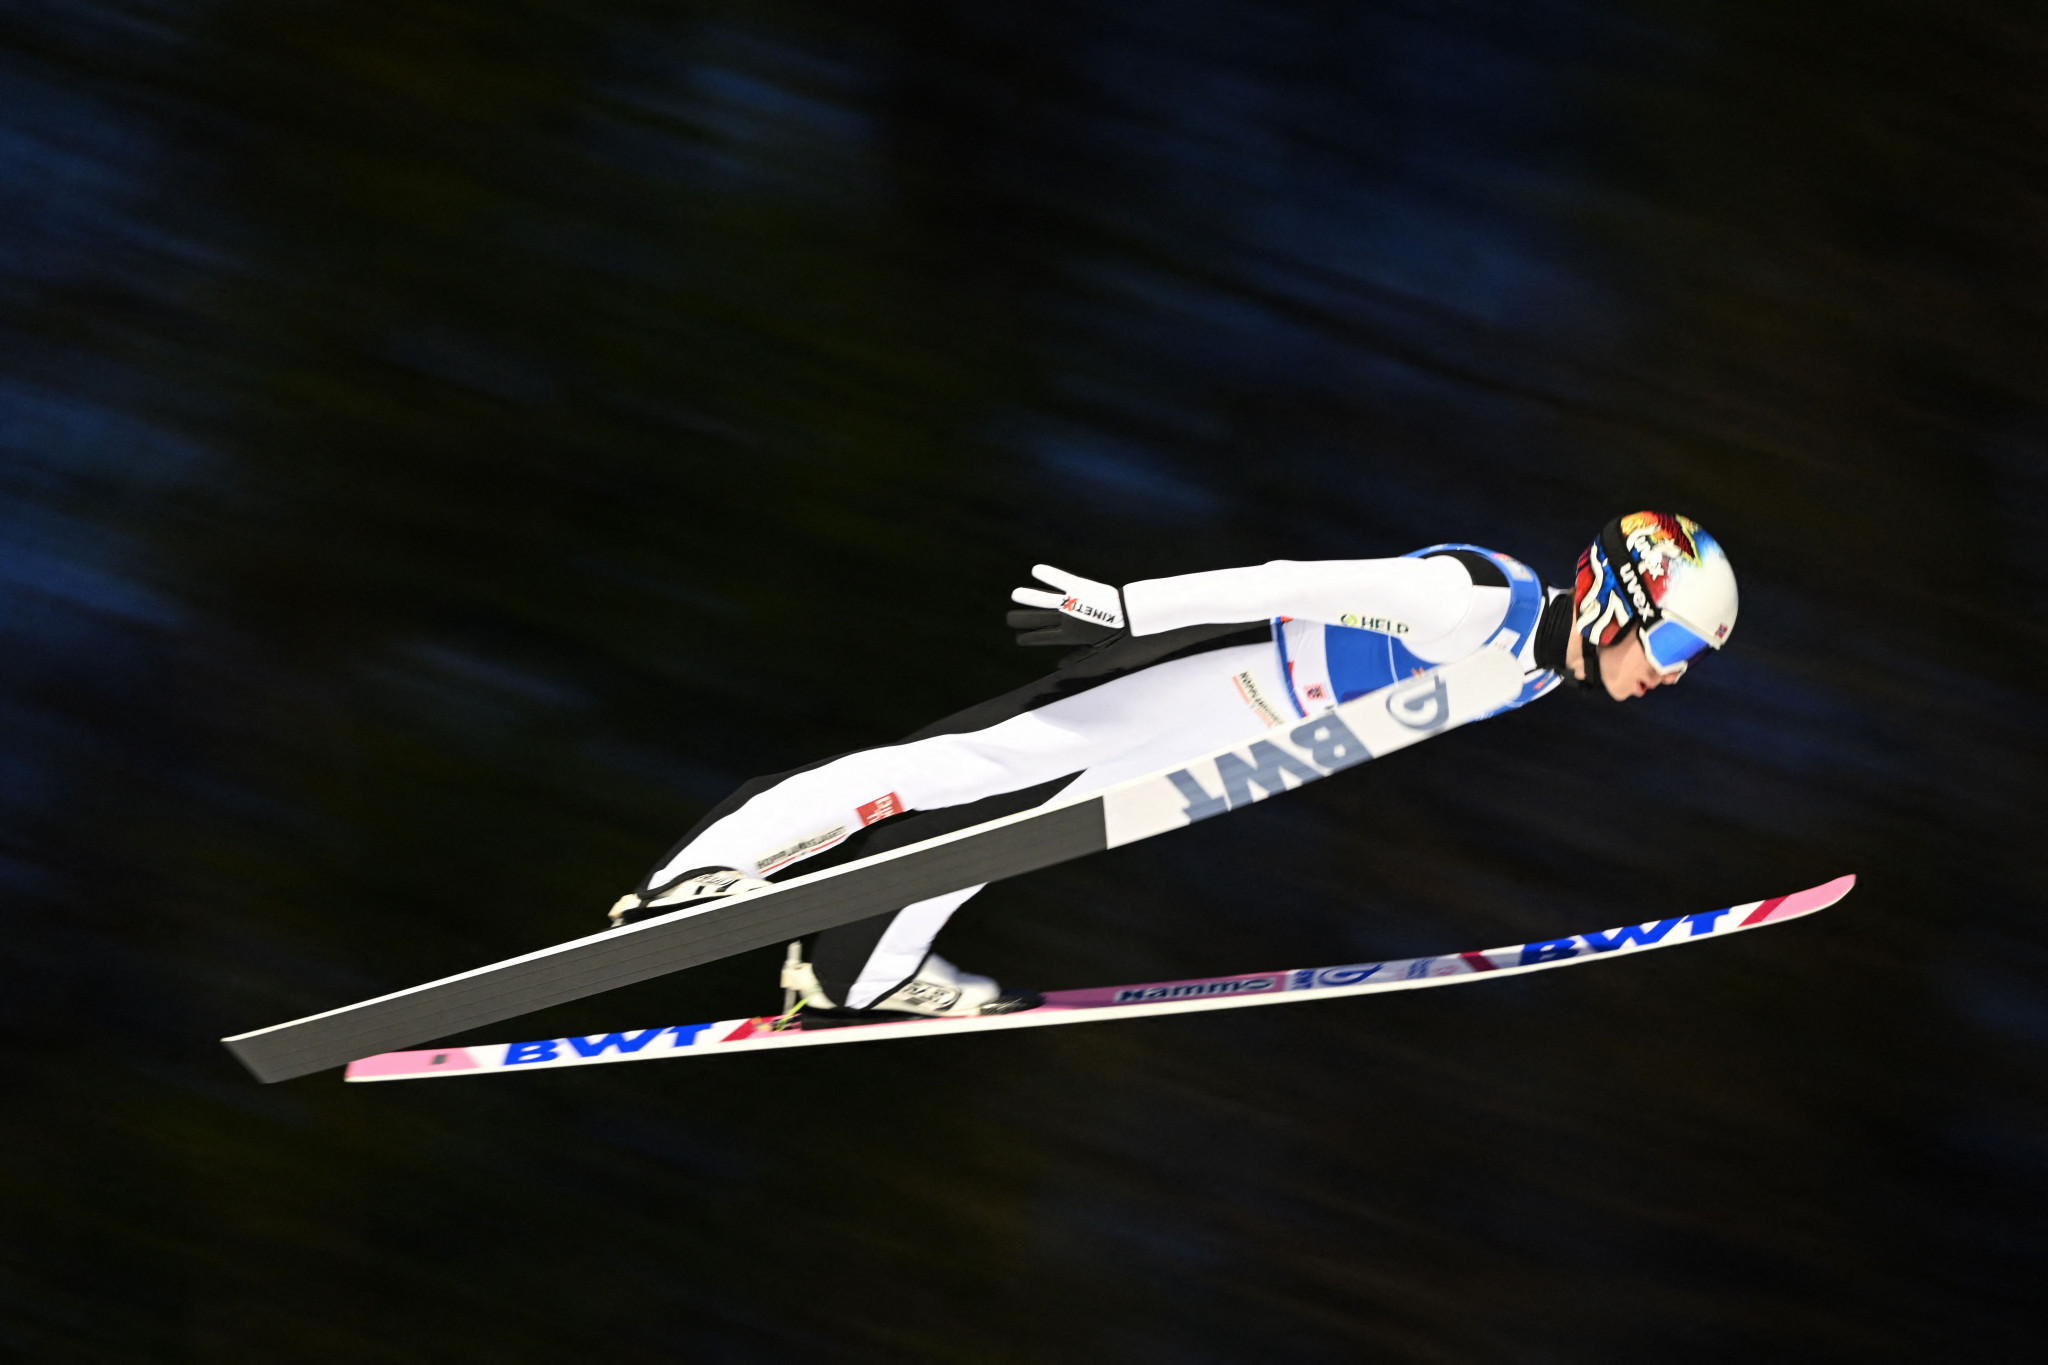 Halvor Egner Granerud was the last of the quartet at the Ski Jumping World Cup in Willingen ©Getty Images